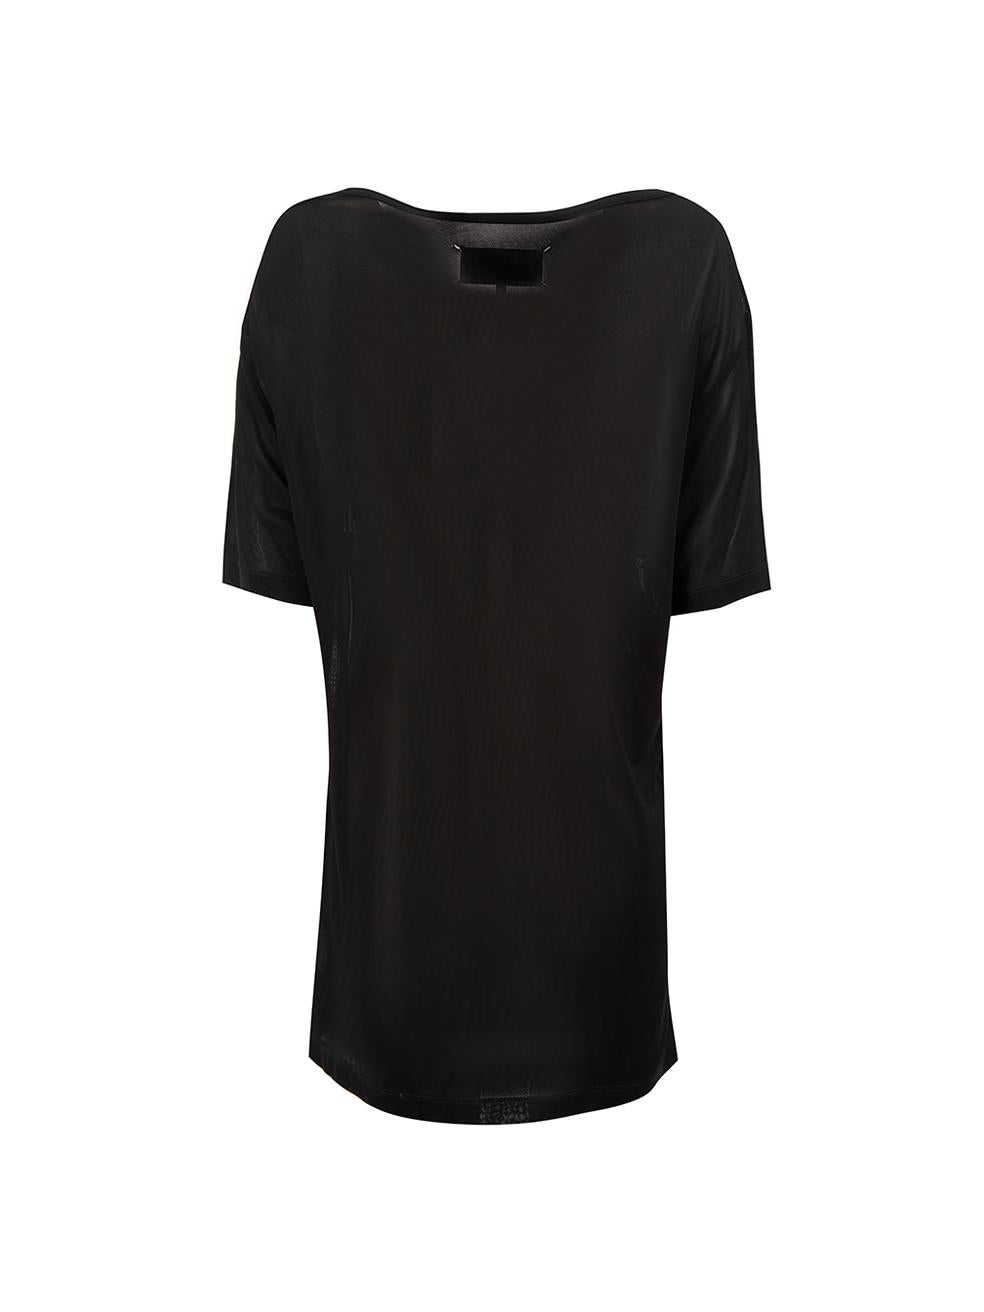 Maison Margiela Black Sheer Oversize T-Shirt Size M In Good Condition For Sale In London, GB